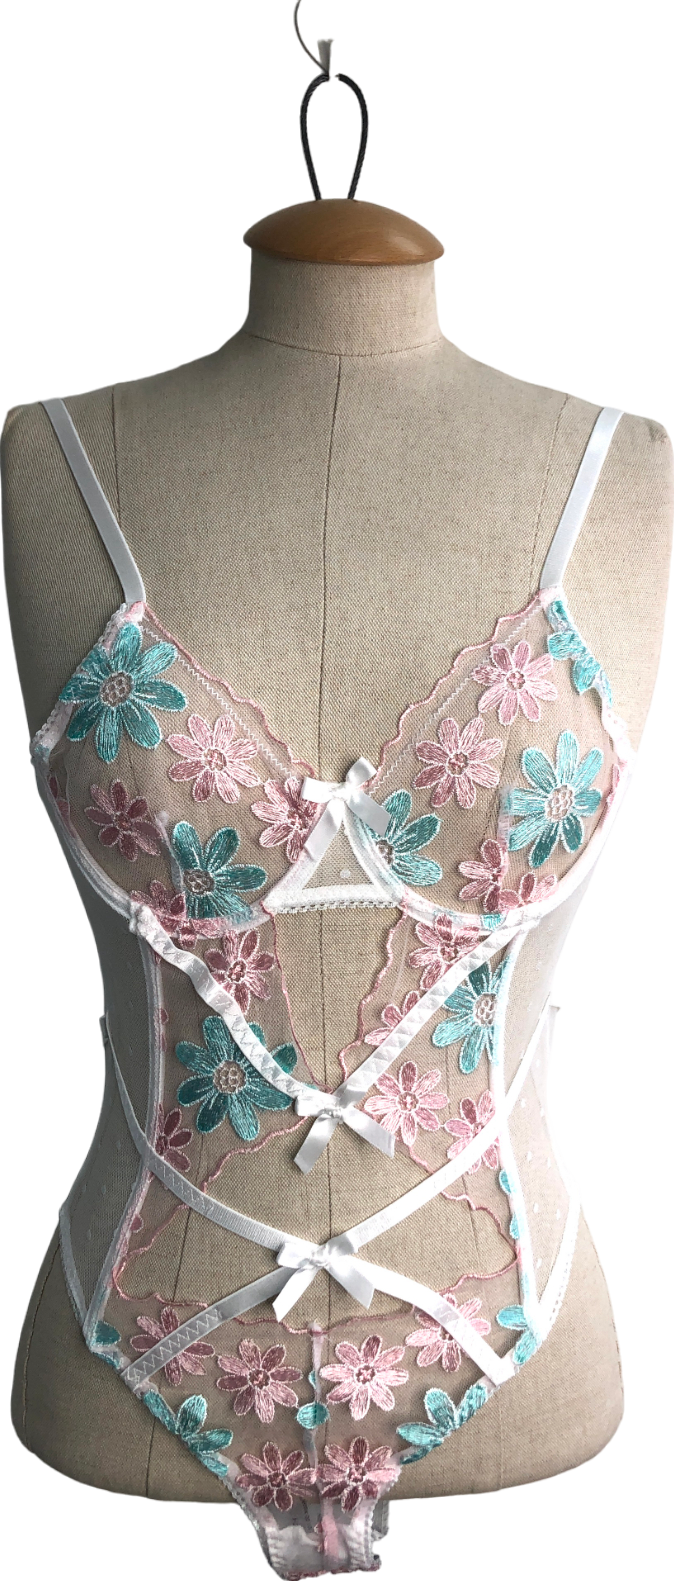 Nasty Gal White Floral Embroidered Scallop Bow Trim Cut Out Lingerie Bodysuit UK 8